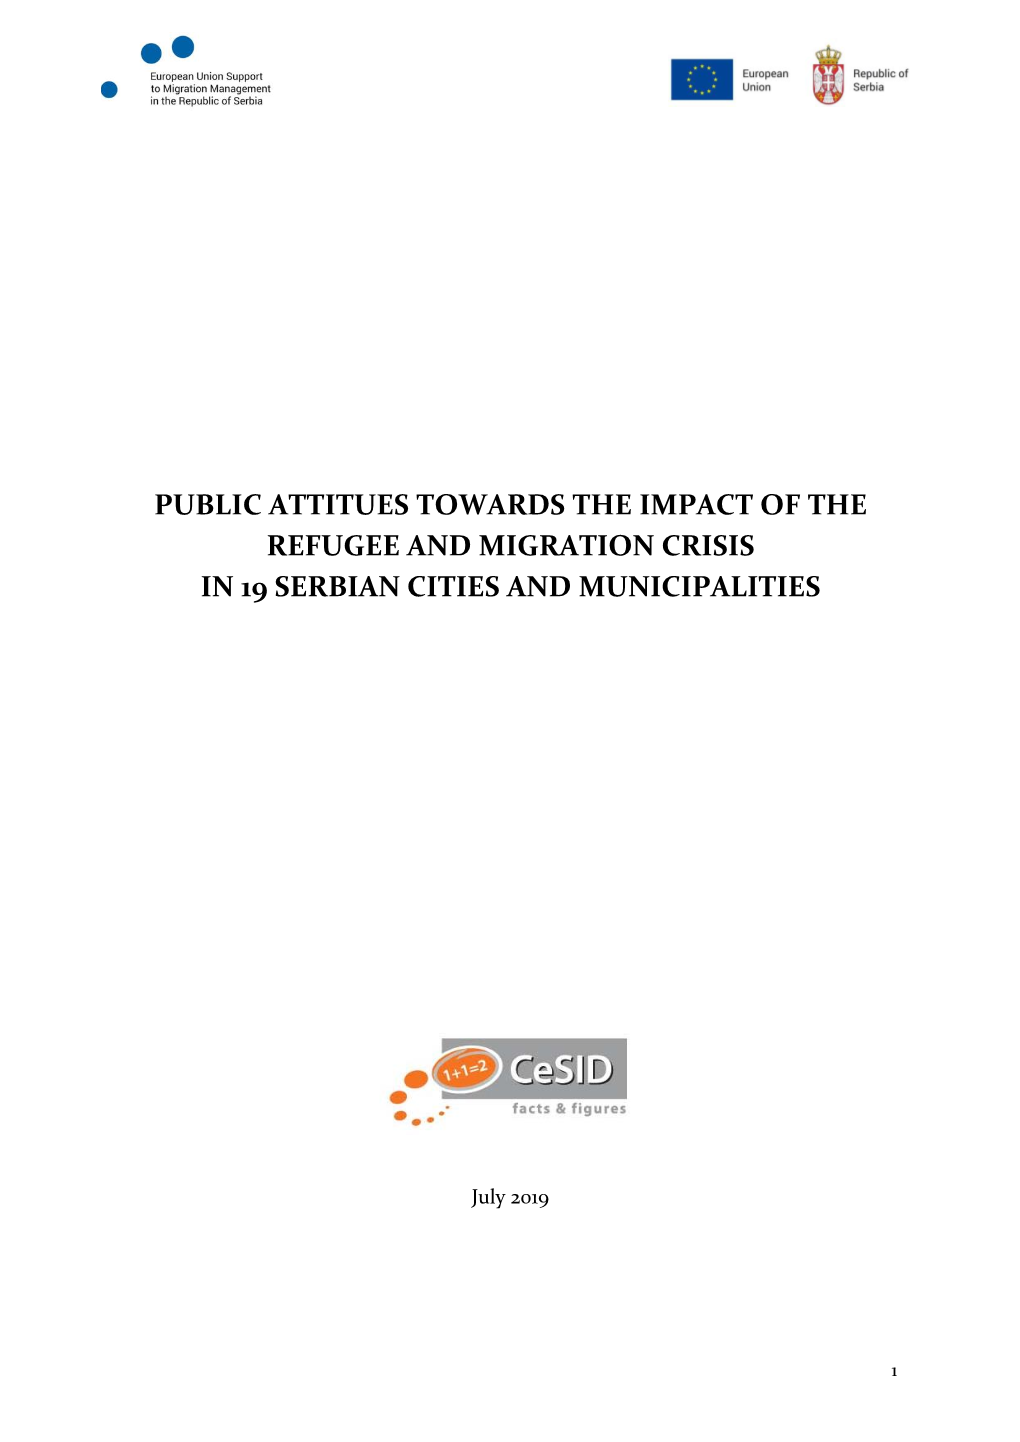 Public Attitues Towards the Impact of the Refugee and Migration Crisis in 19 Serbian Cities and Municipalities